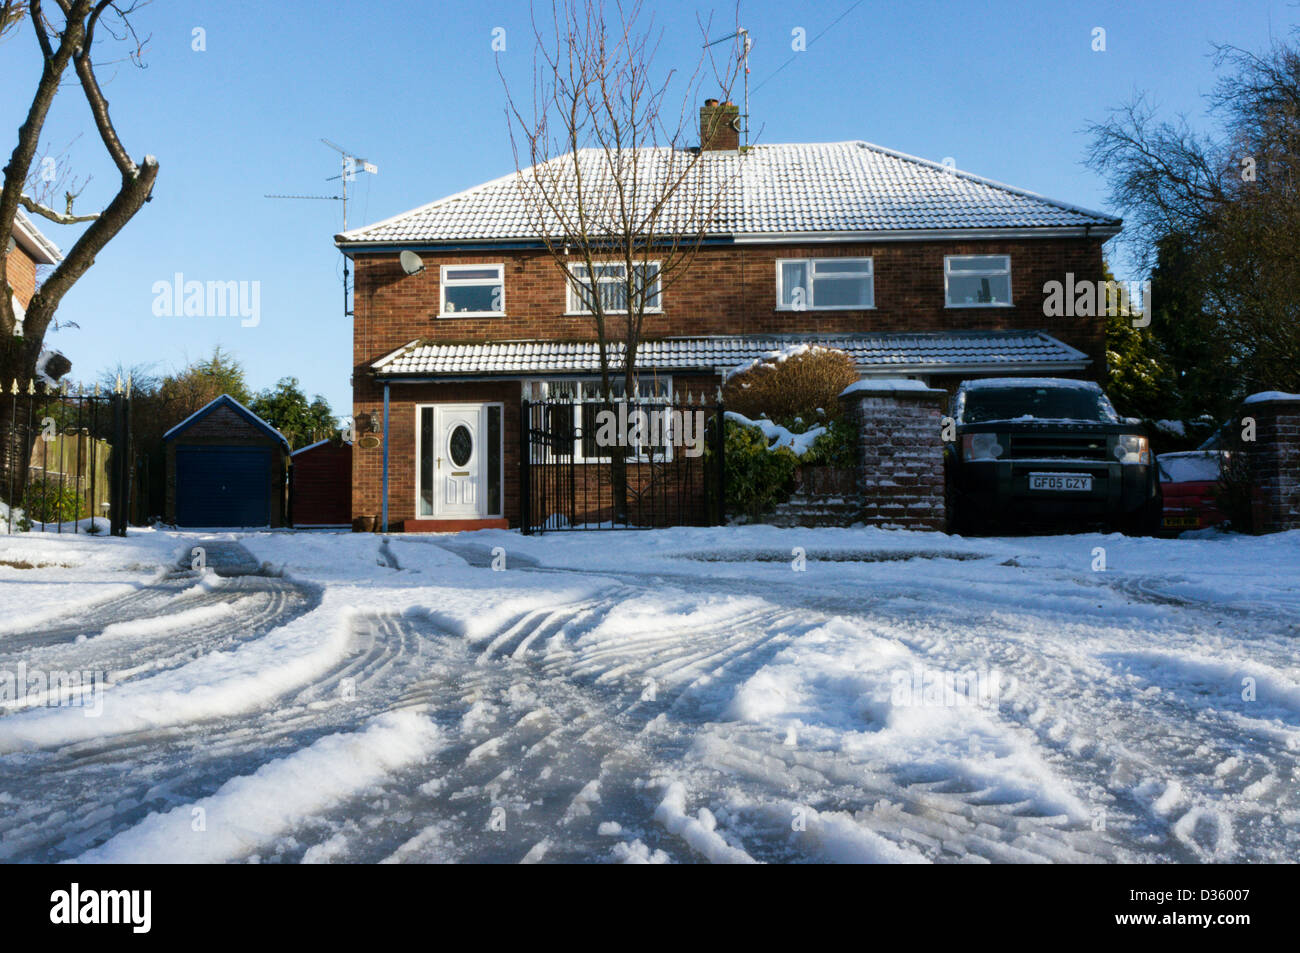 Wheel ruts in snow on an icy residential road. Stock Photo